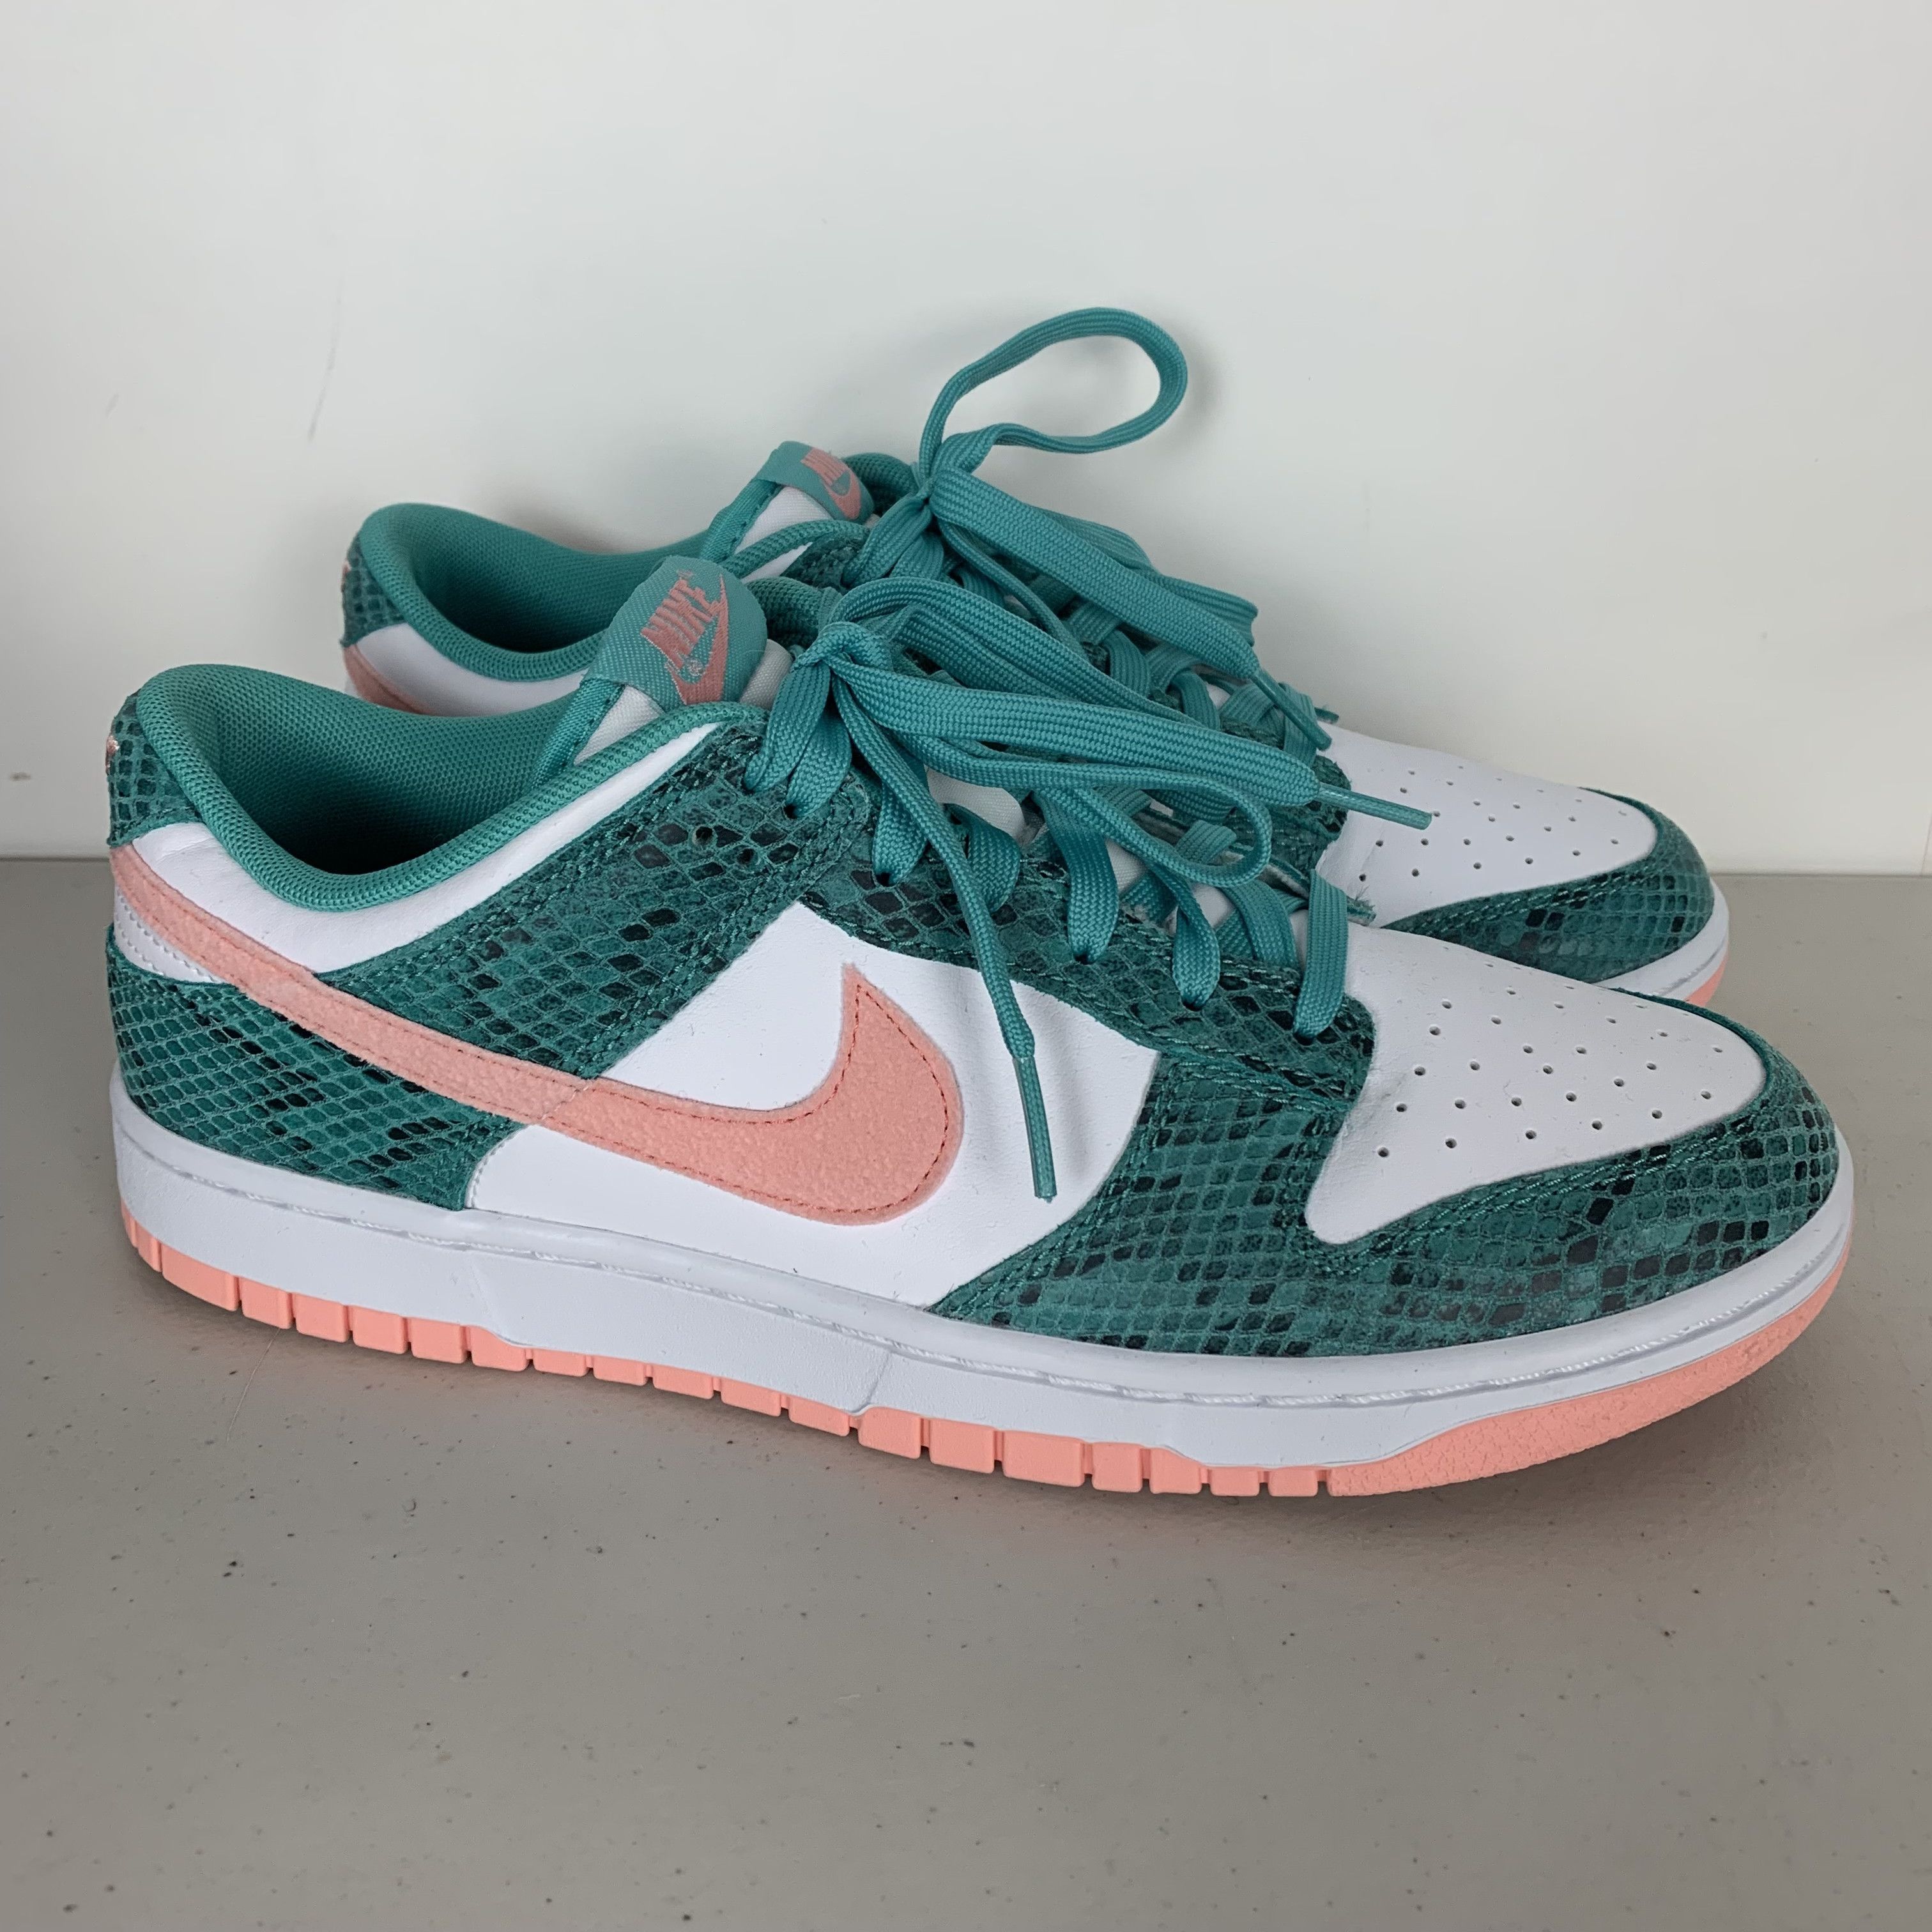 Nike Dunk Low Snakeskin Washed Teal Bleached Coral | Grailed